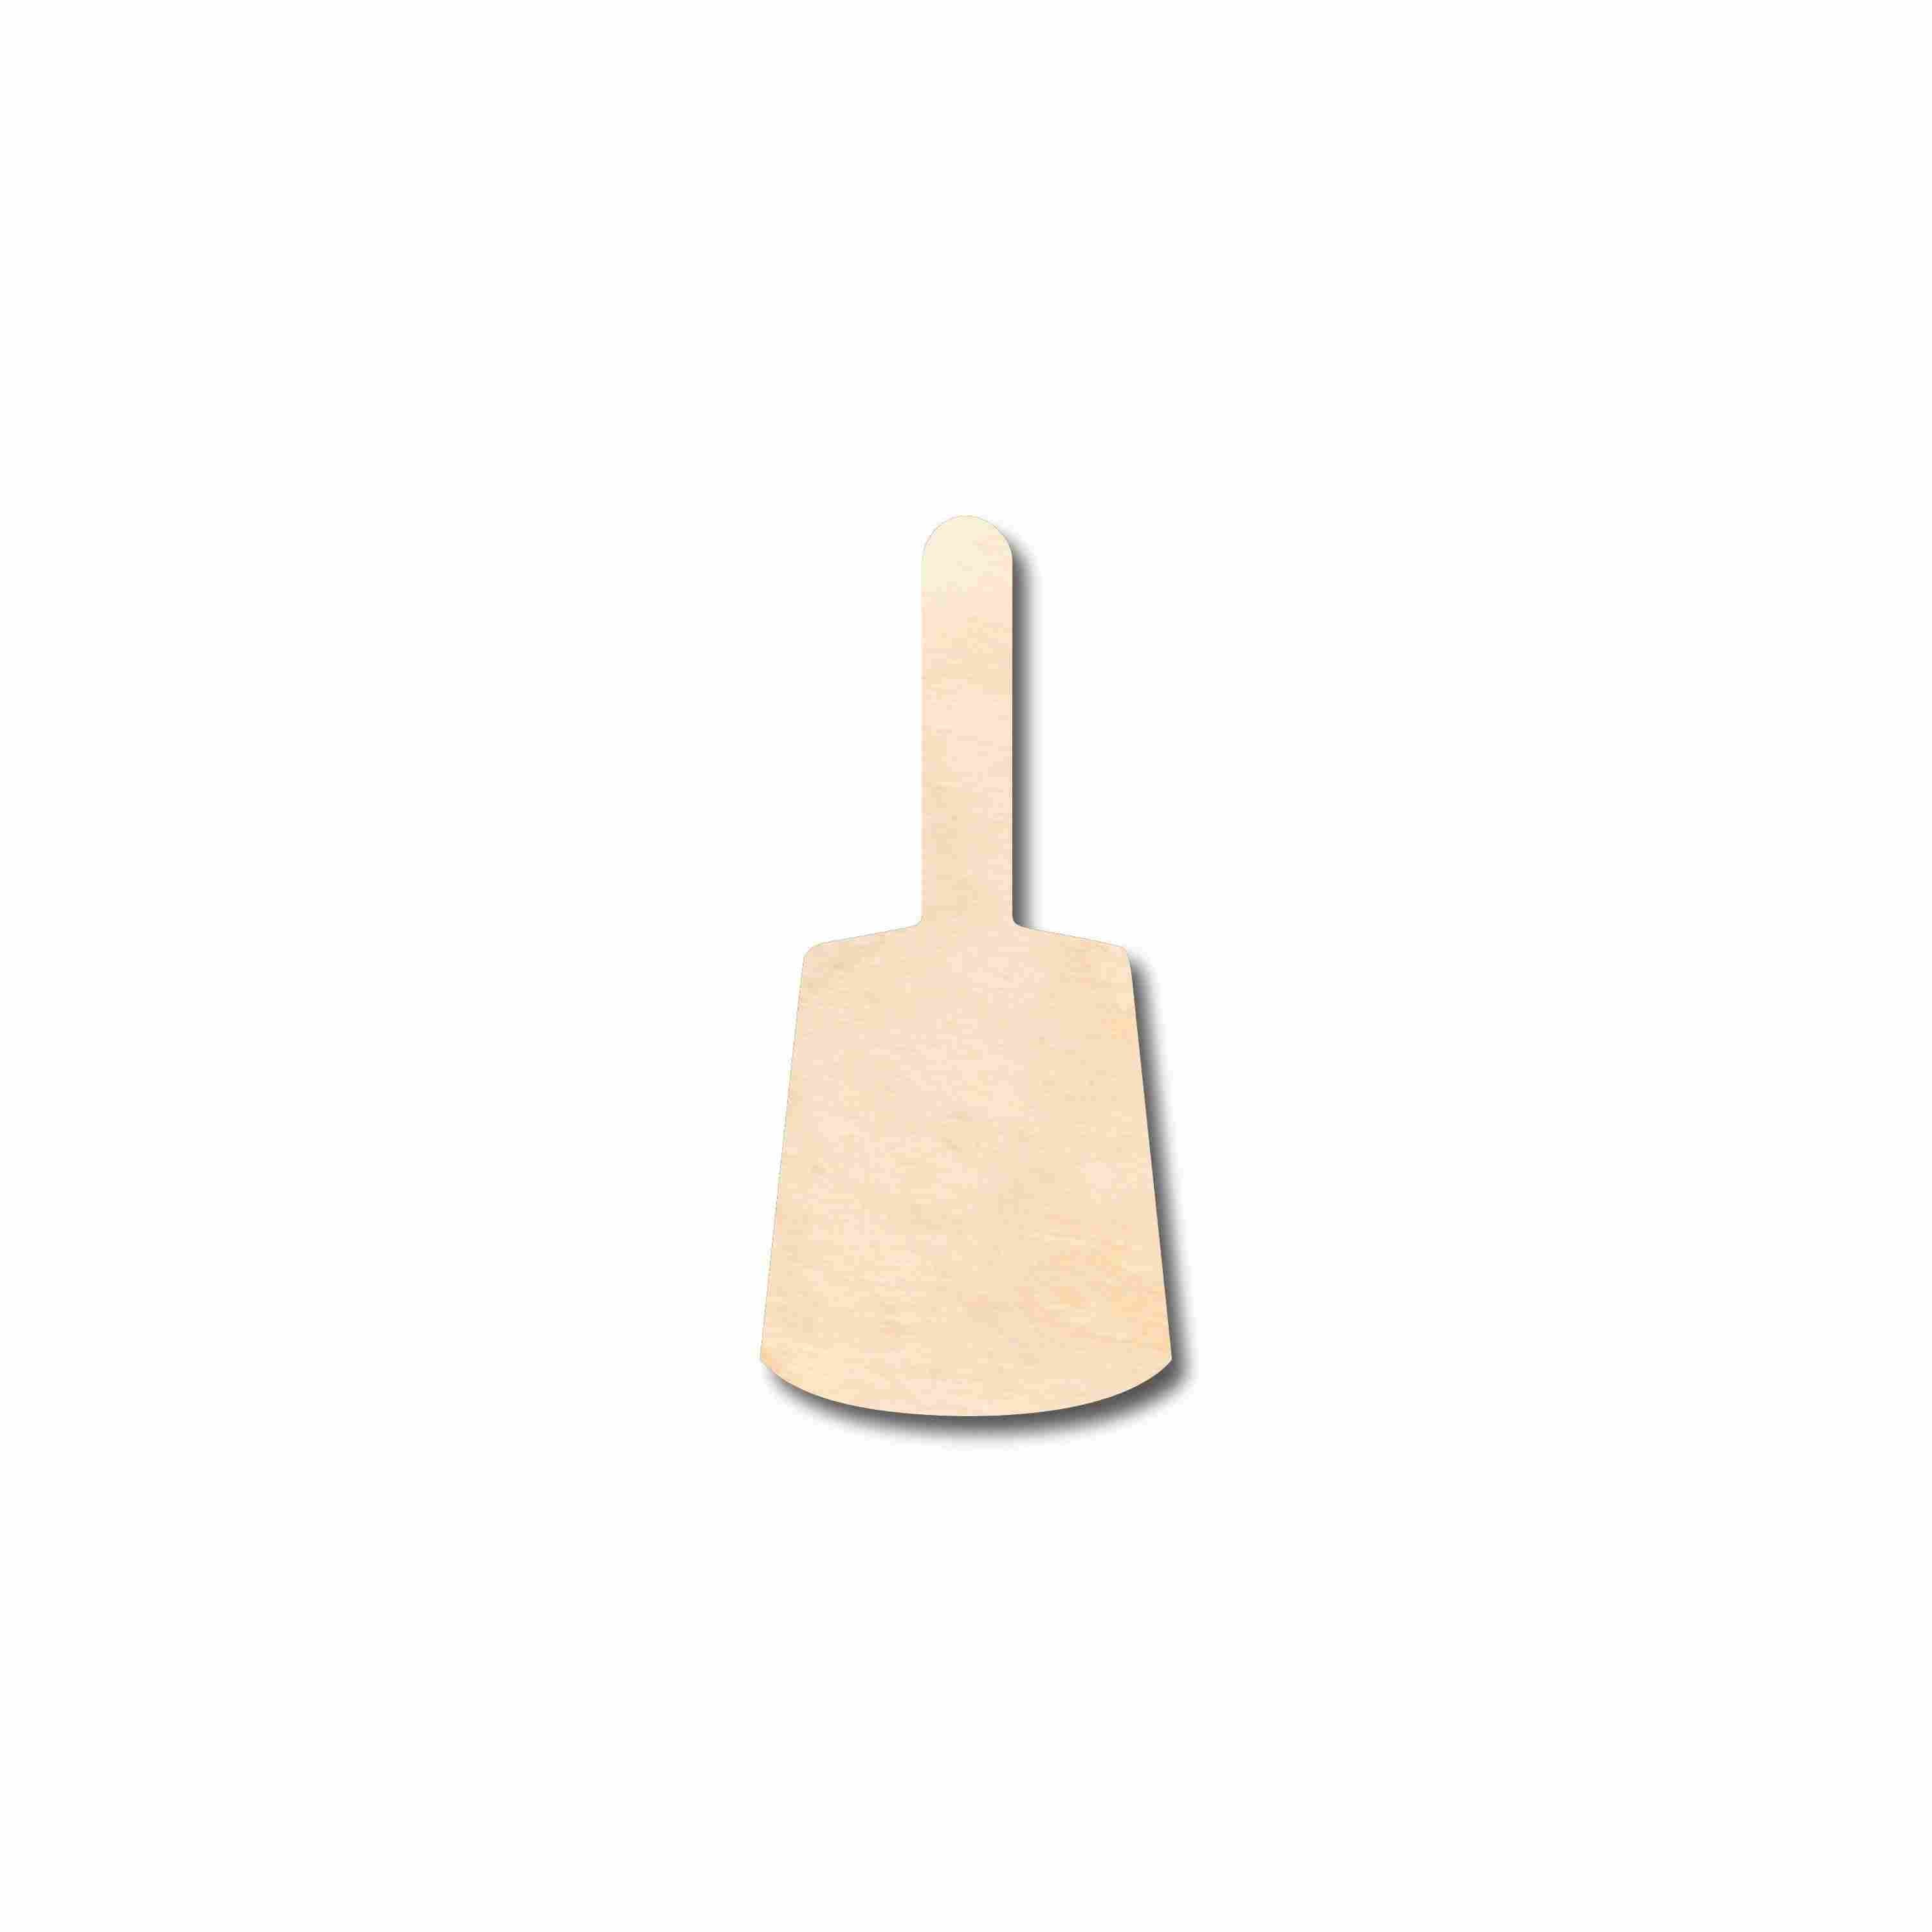 Unfinished Wood Cow Bell Silhouette - Craft- up to 24